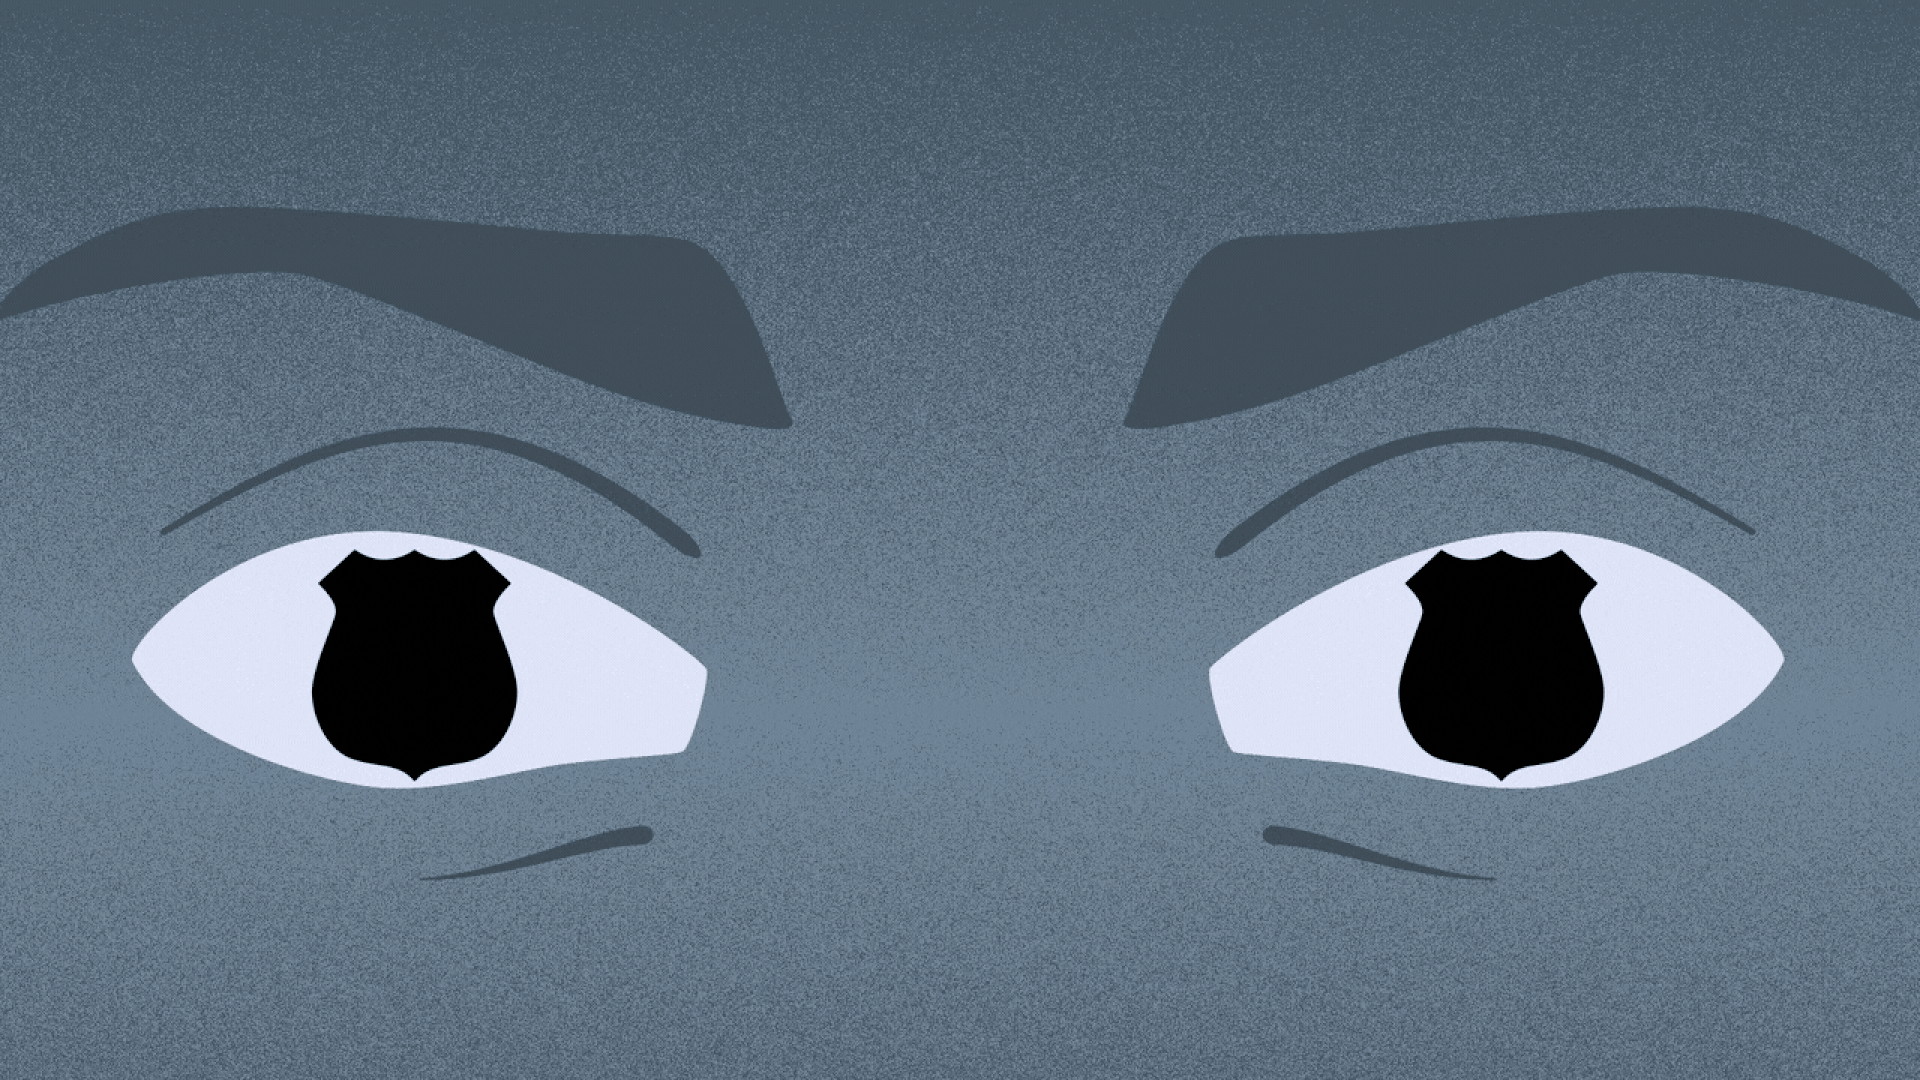 Illustration of a pair of blinking eyes with police badges for irises.